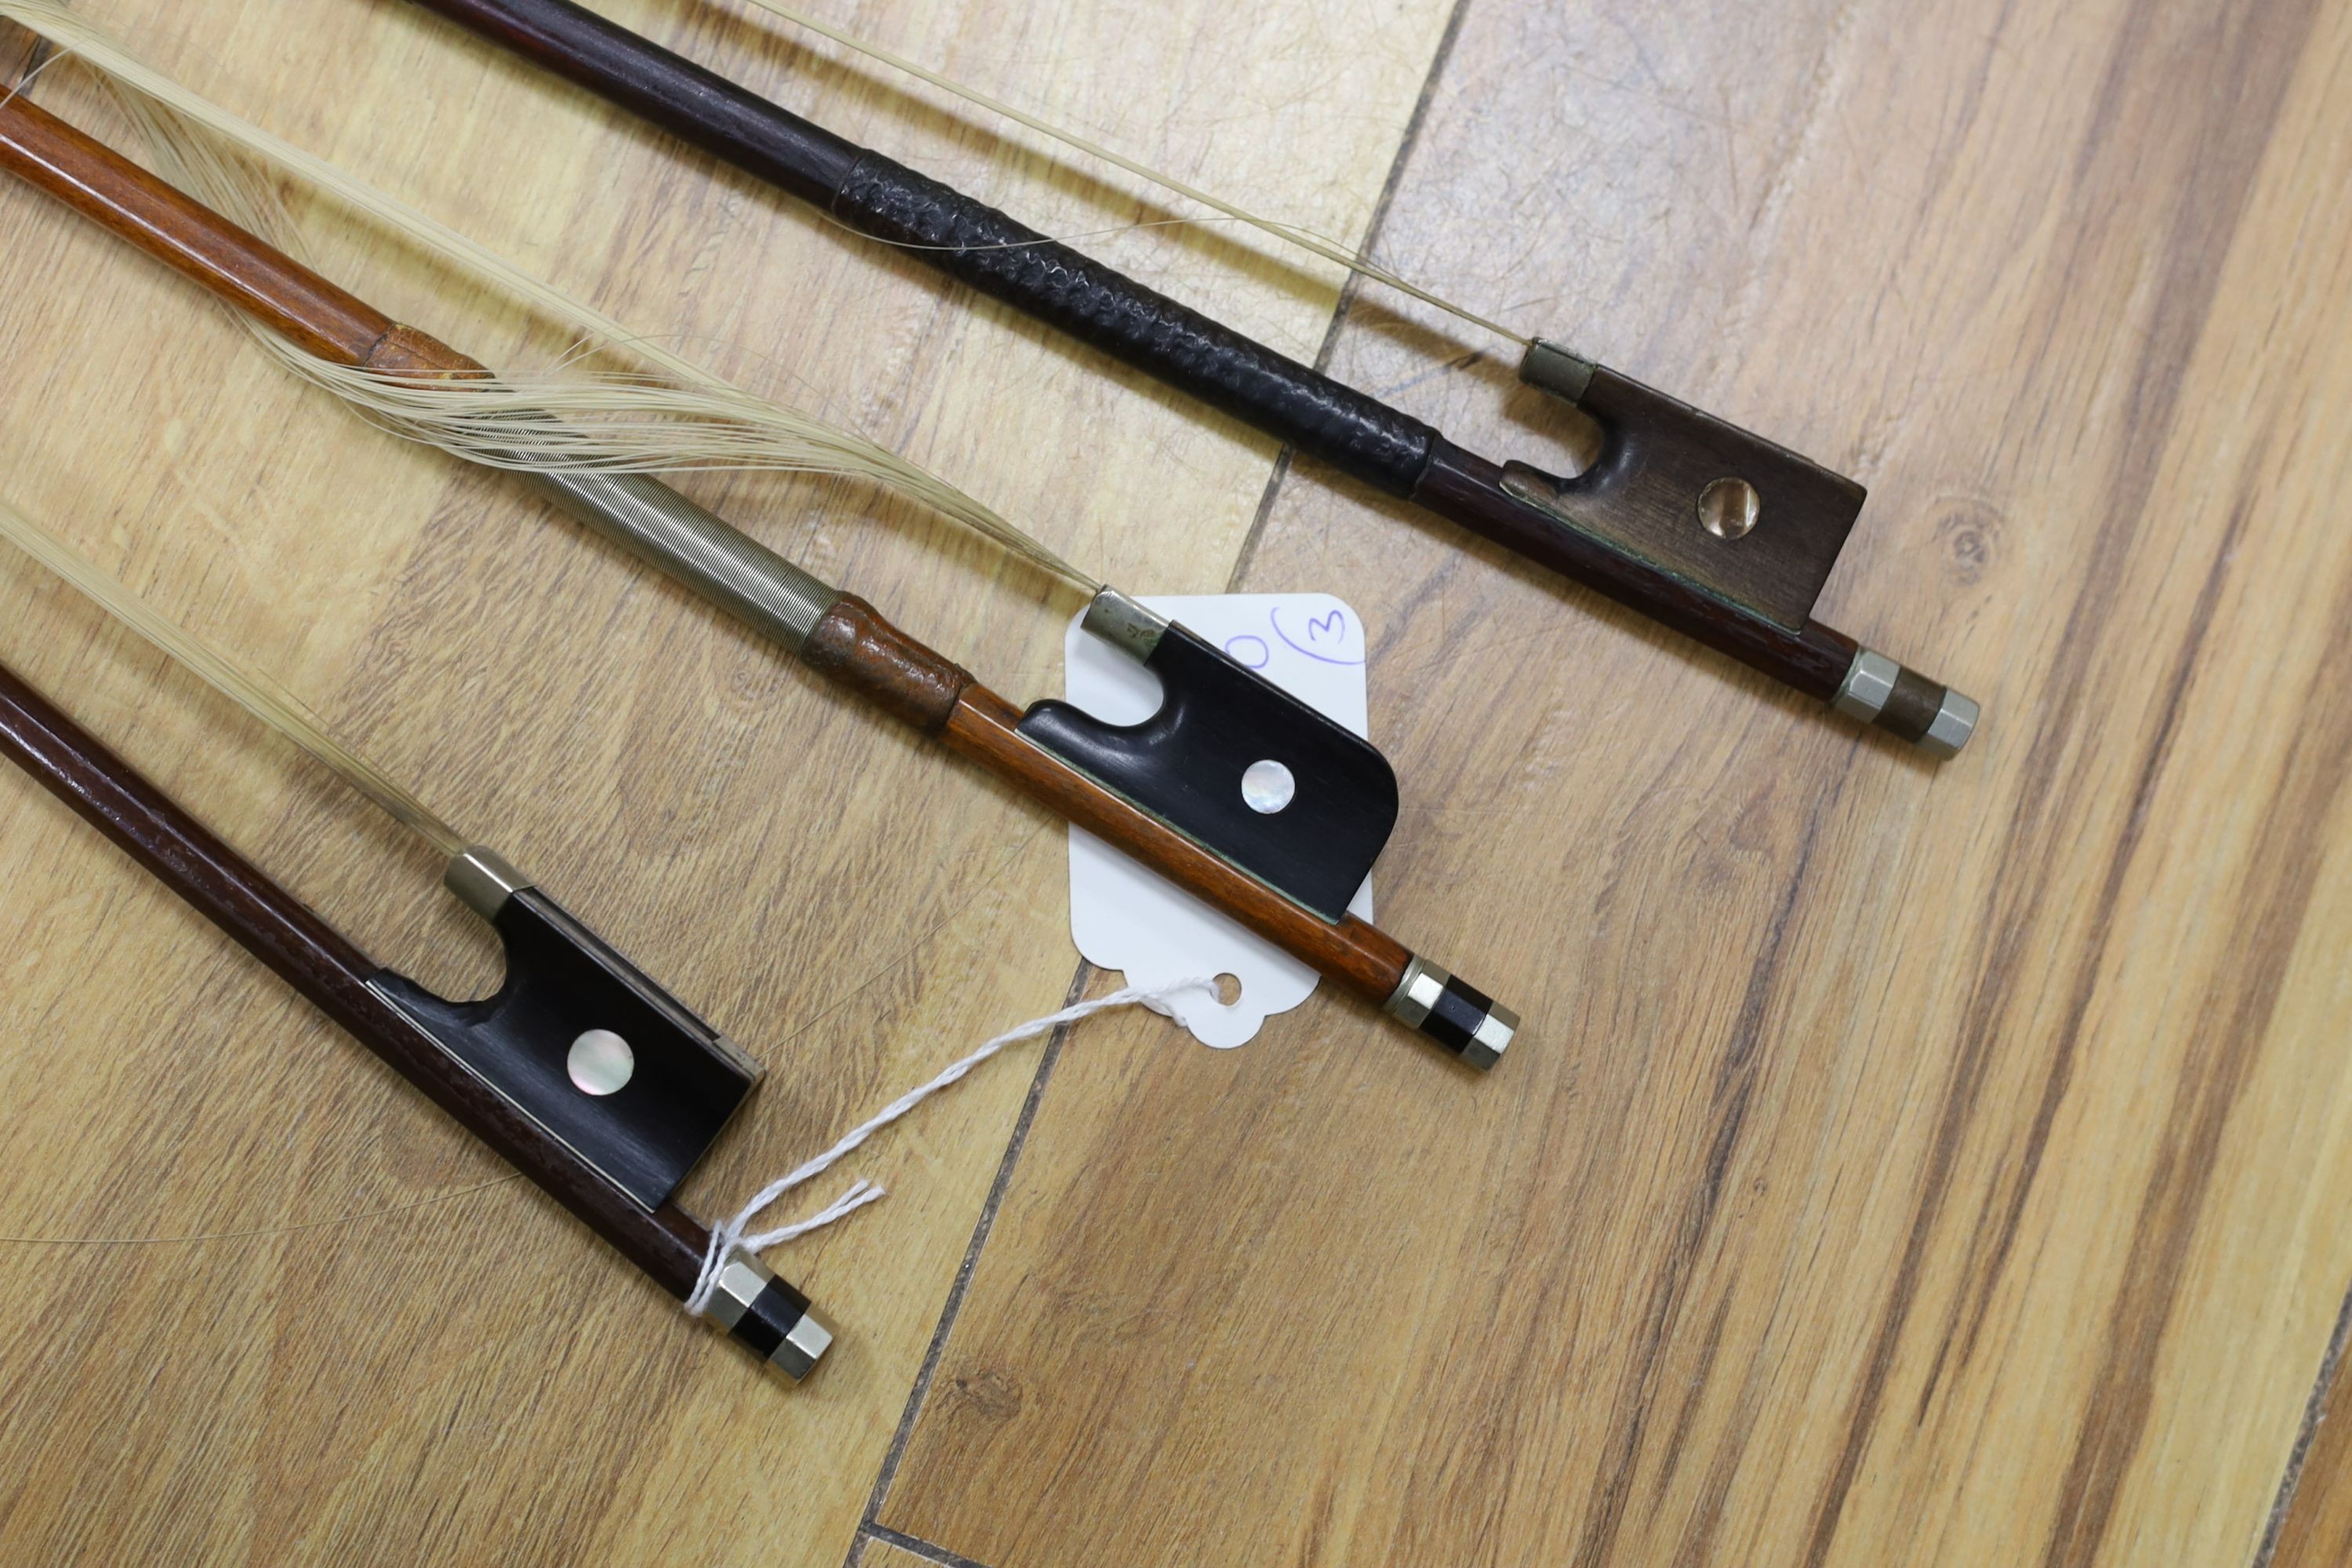 Three nickel mounted violin bows, one stamped R. R. Shields, two with ivory veneered tip - longest 75cm